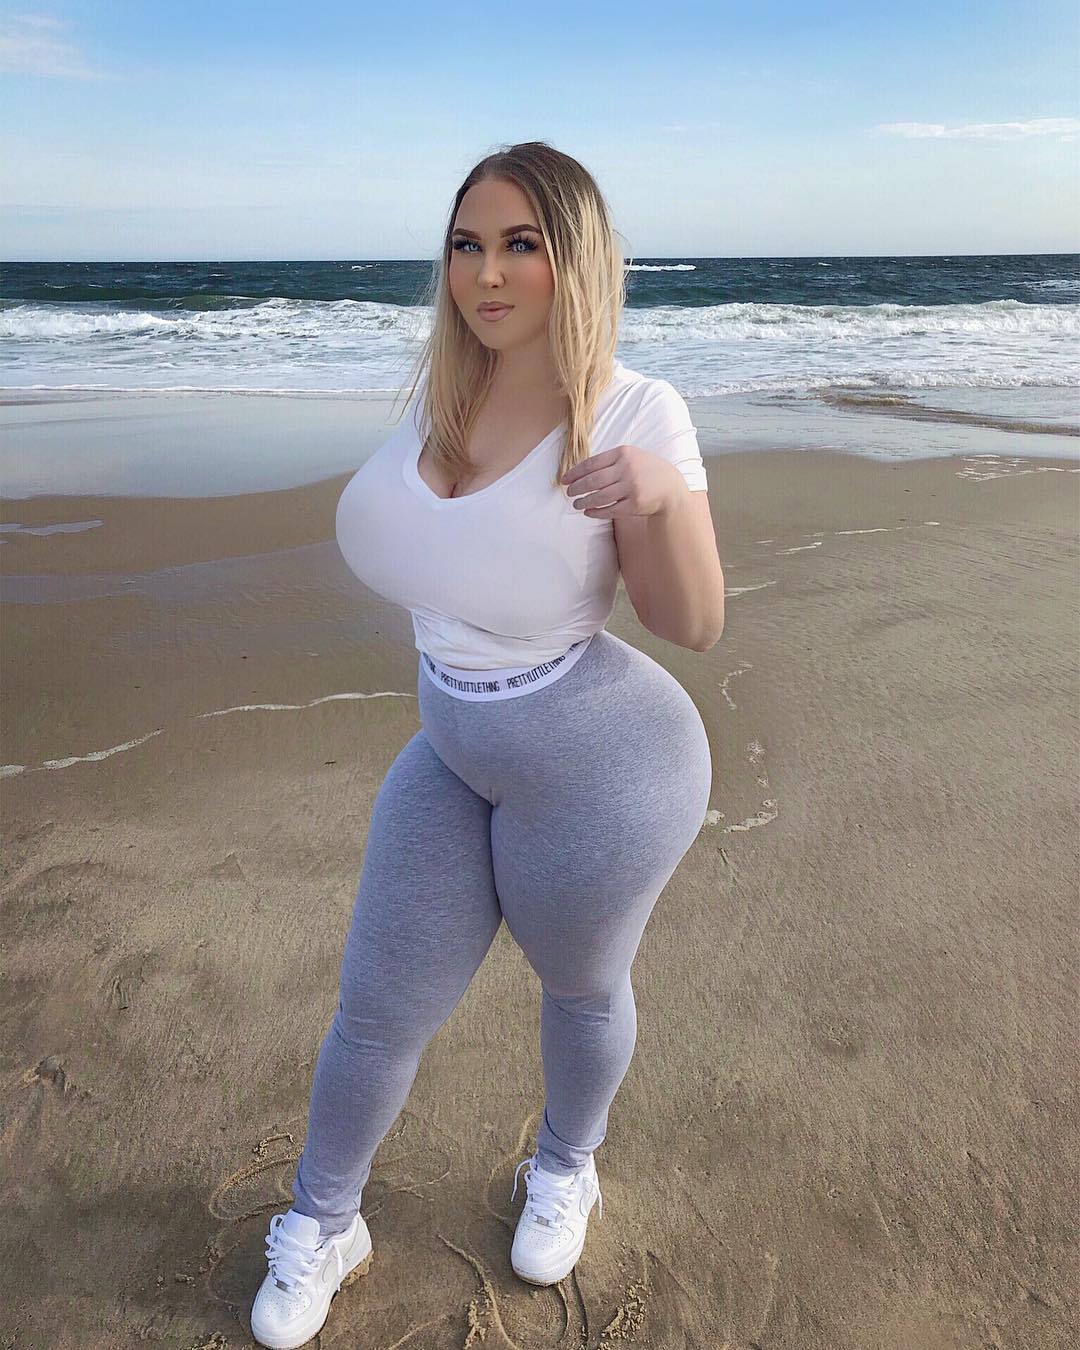 Pawg german compilation